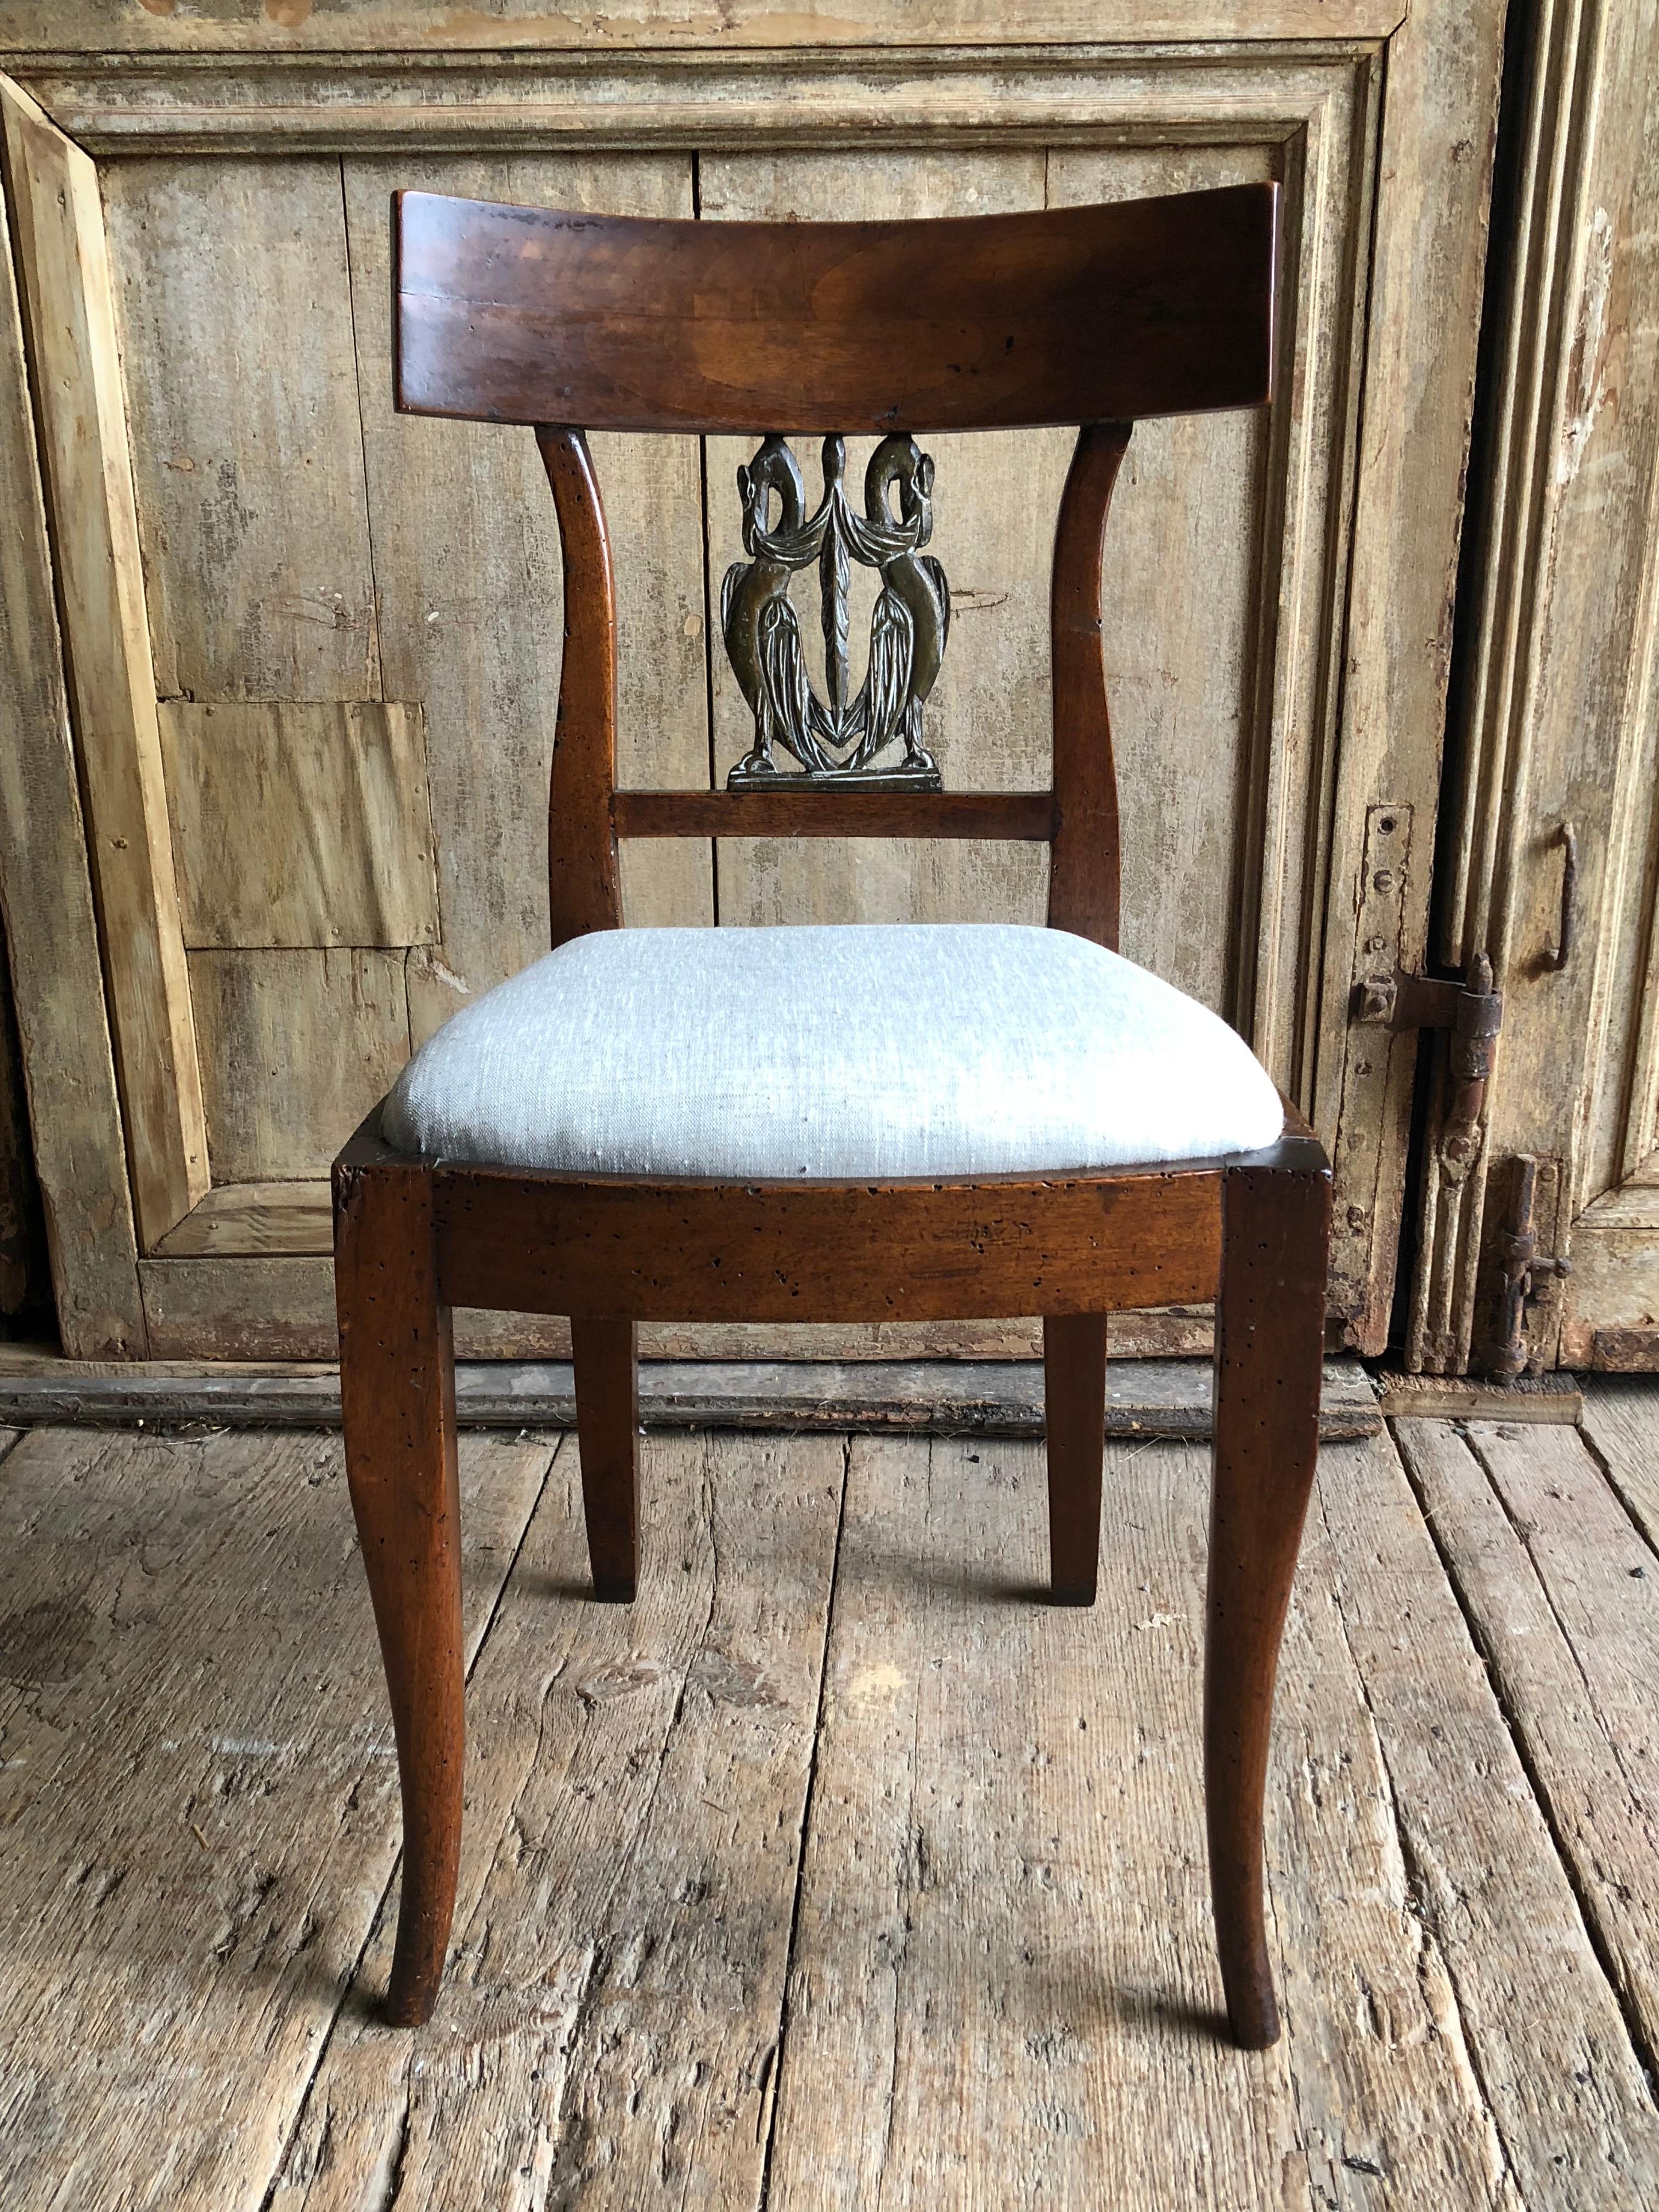 An 18th century Italian side chair in walnut with a “yoke-back” and an inset carved back panel with 2 winged griffons, the panel showing some traces of old paint, over a slip seat recovered in grey linen all on simple splayed legs, circa 1780.